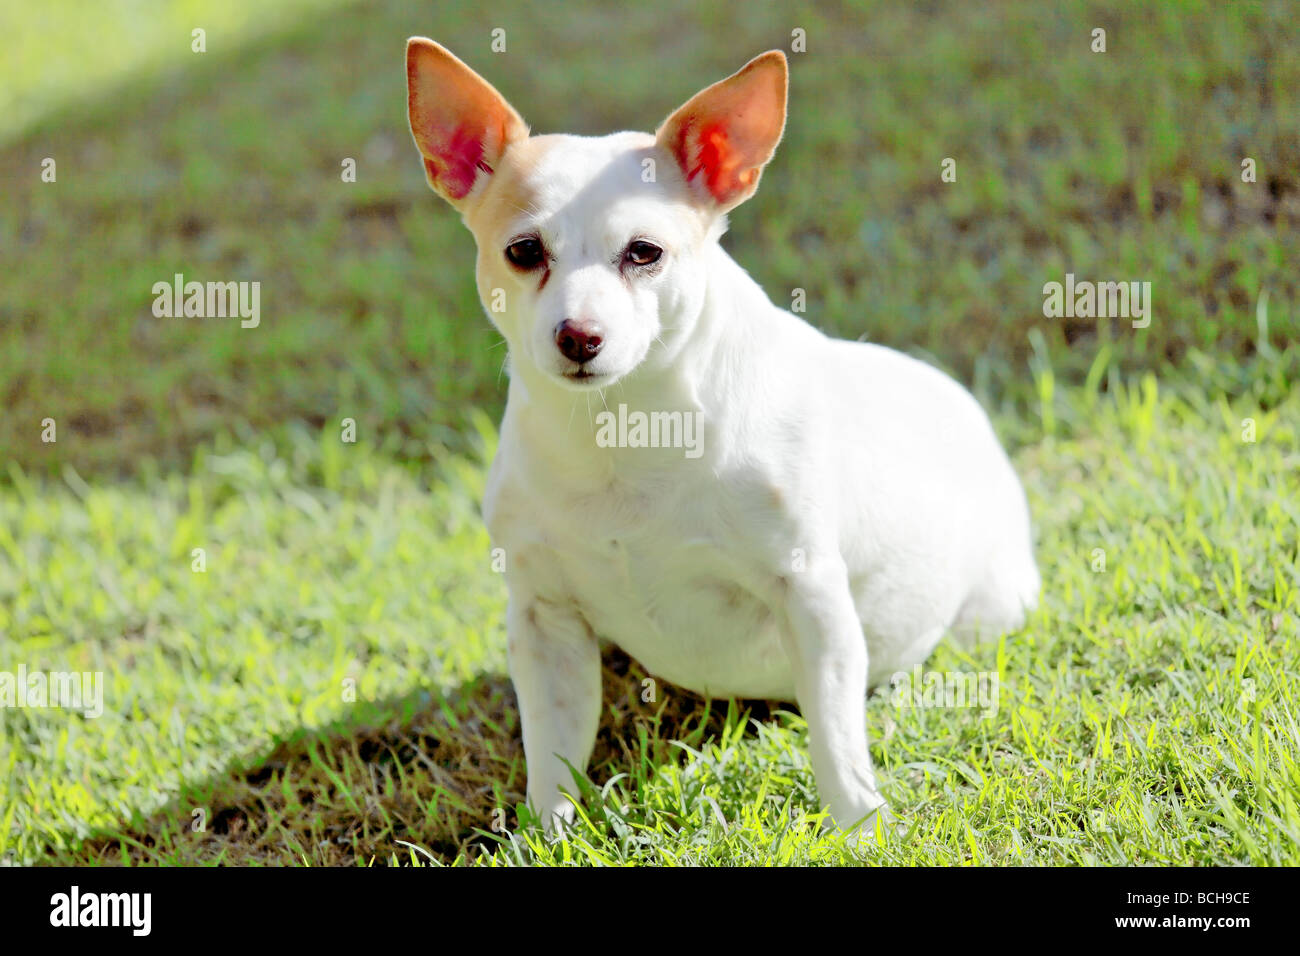 Chihuahua Jack Russell High Resolution Stock Photography and Images - Alamy